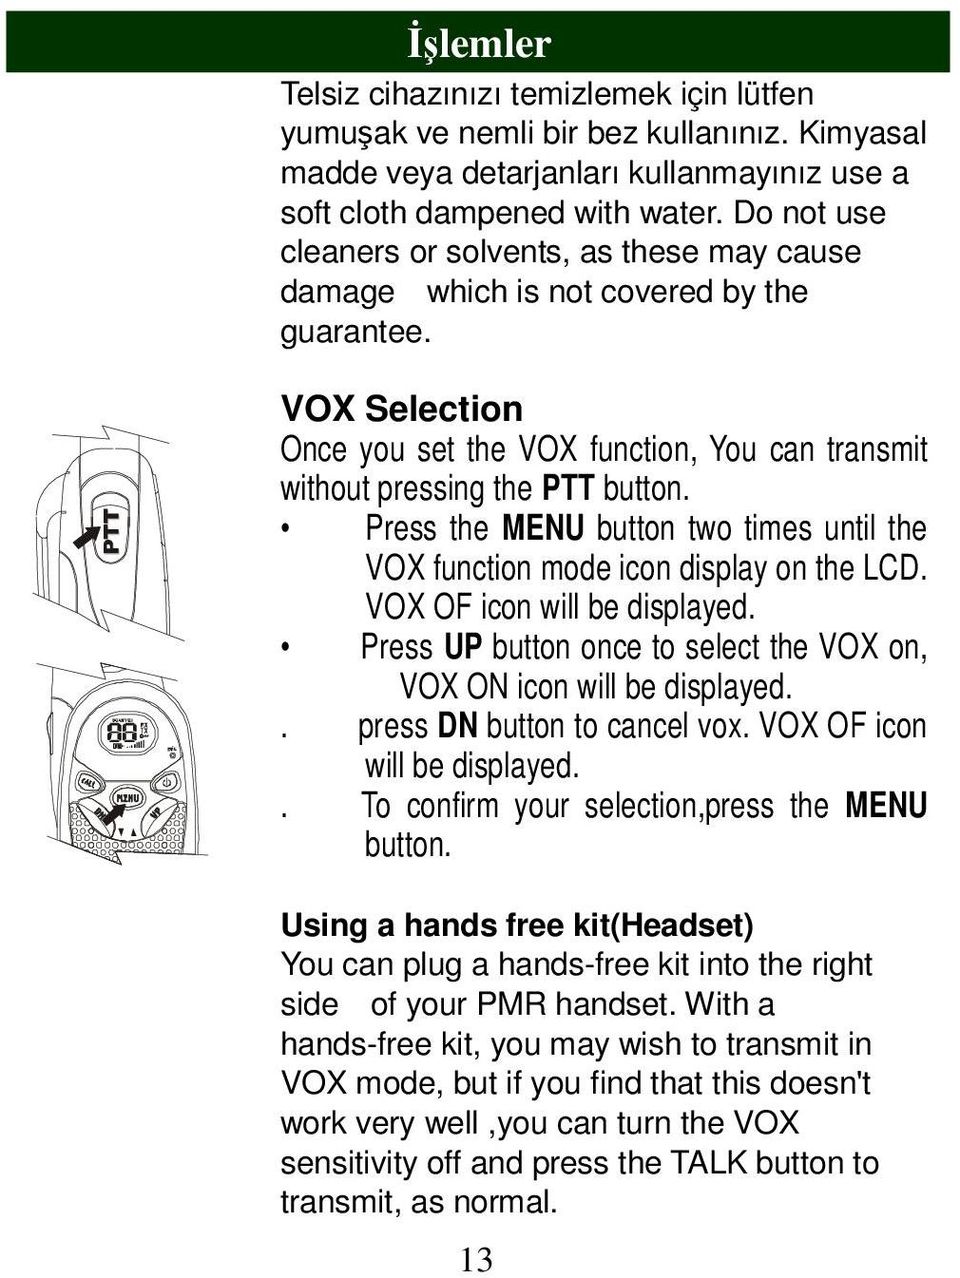 Press the MENU button two times until the VOX function mode icon display on the LCD. VOX OF icon will be displayed. Press UP button once to select the VOX on, VOX ON icon will be displayed.